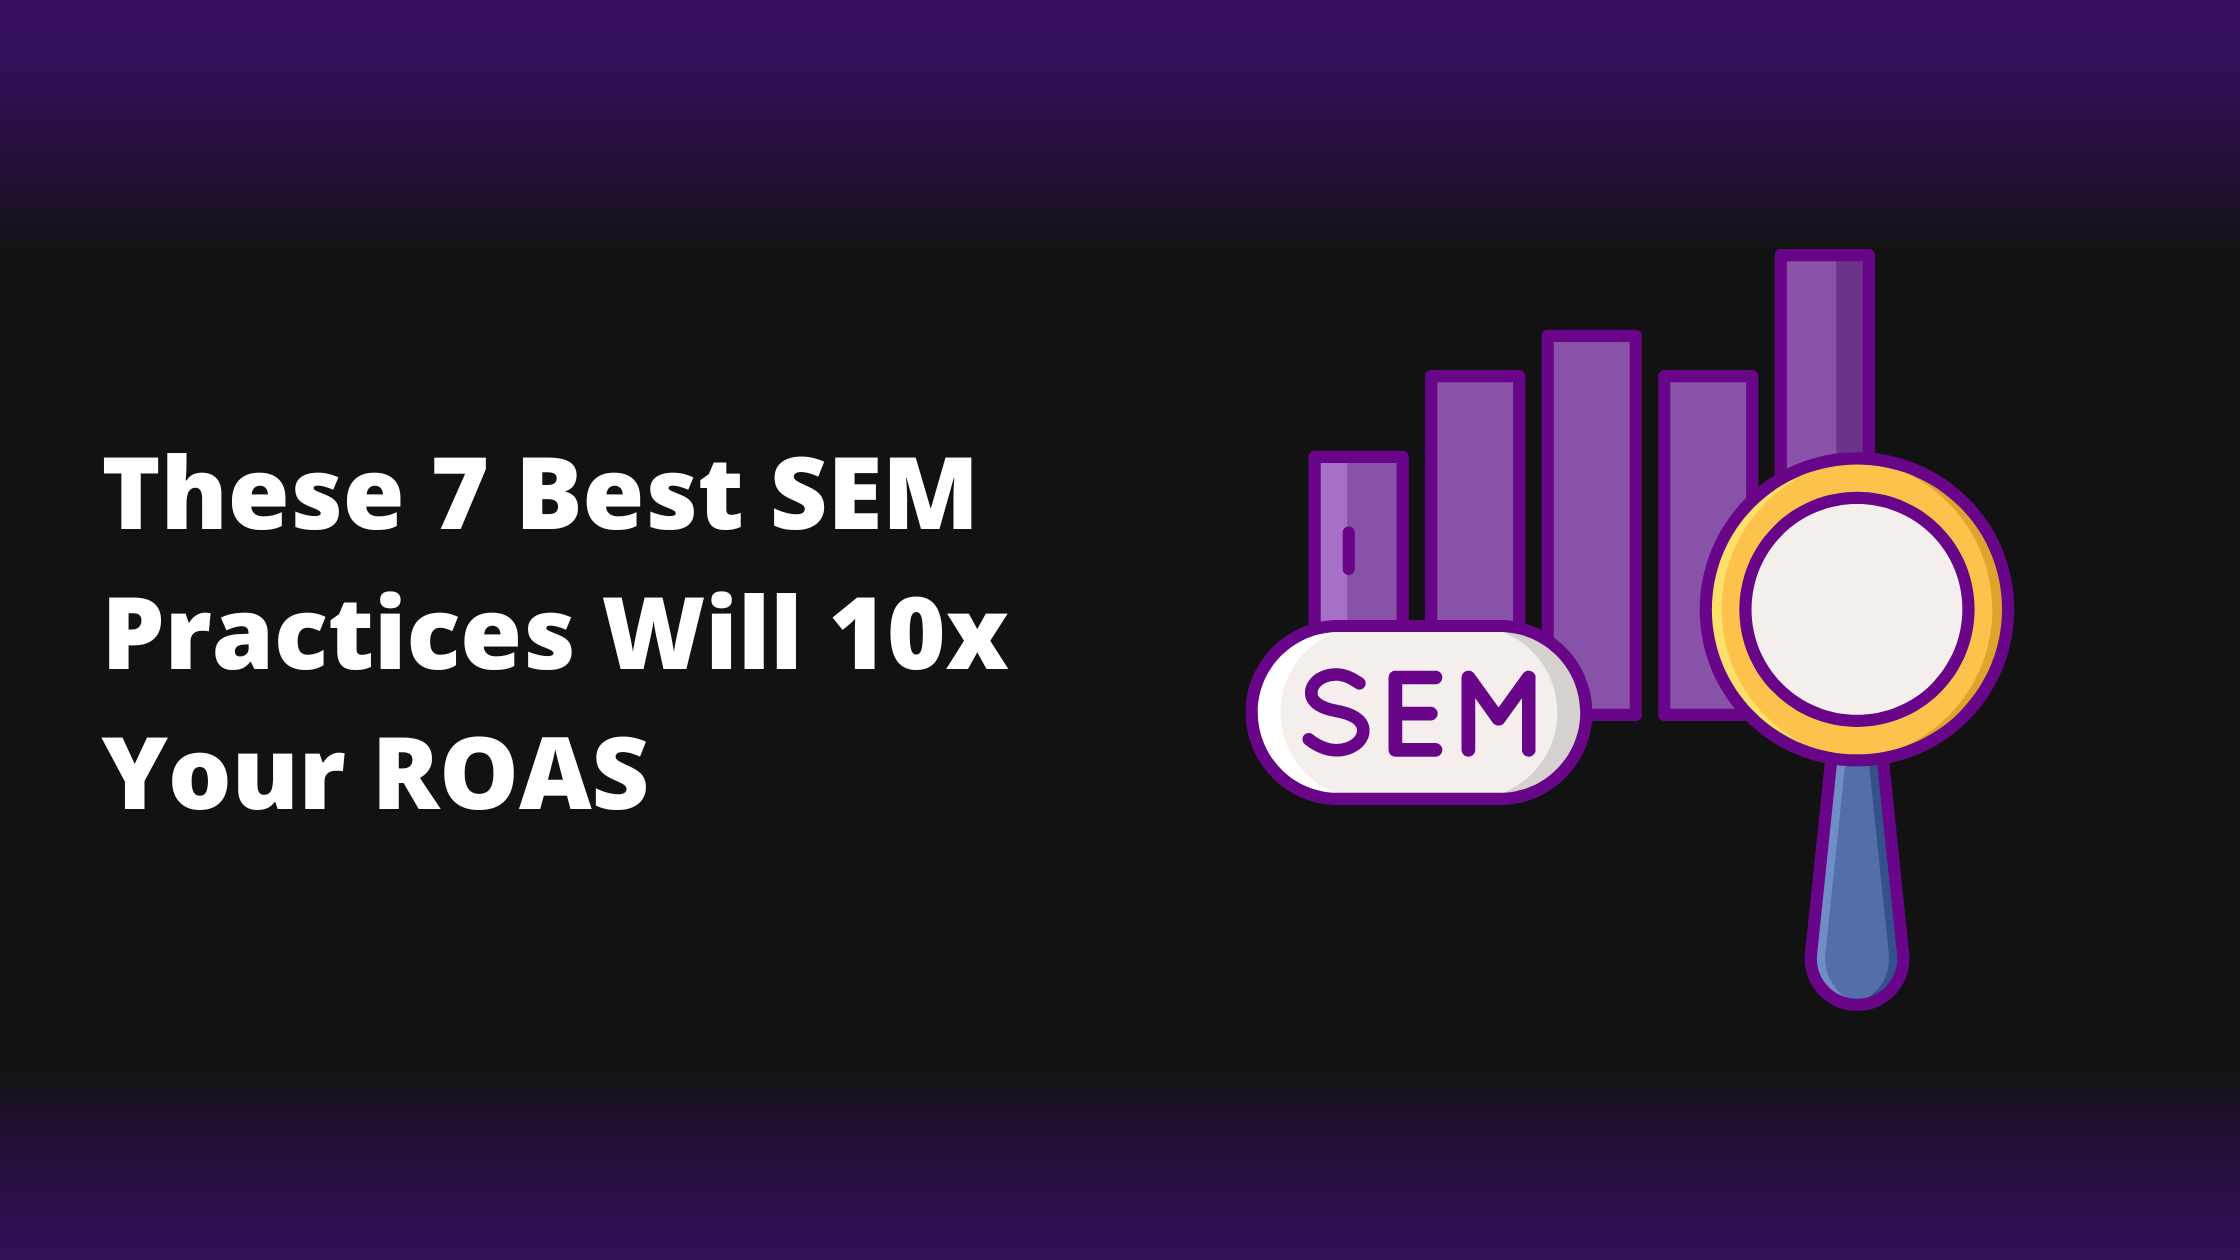 These 7 SEM Best Practices Will 10x Your ROAS